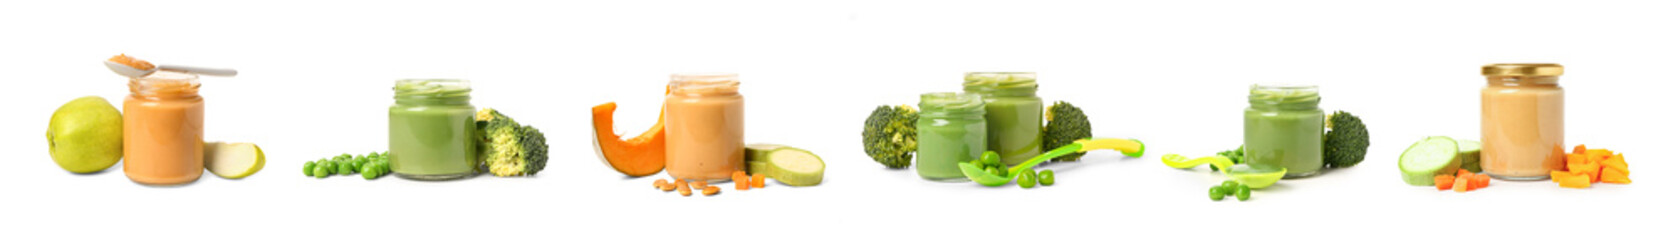 Wall Mural - Set of healthy baby food in jars on white background